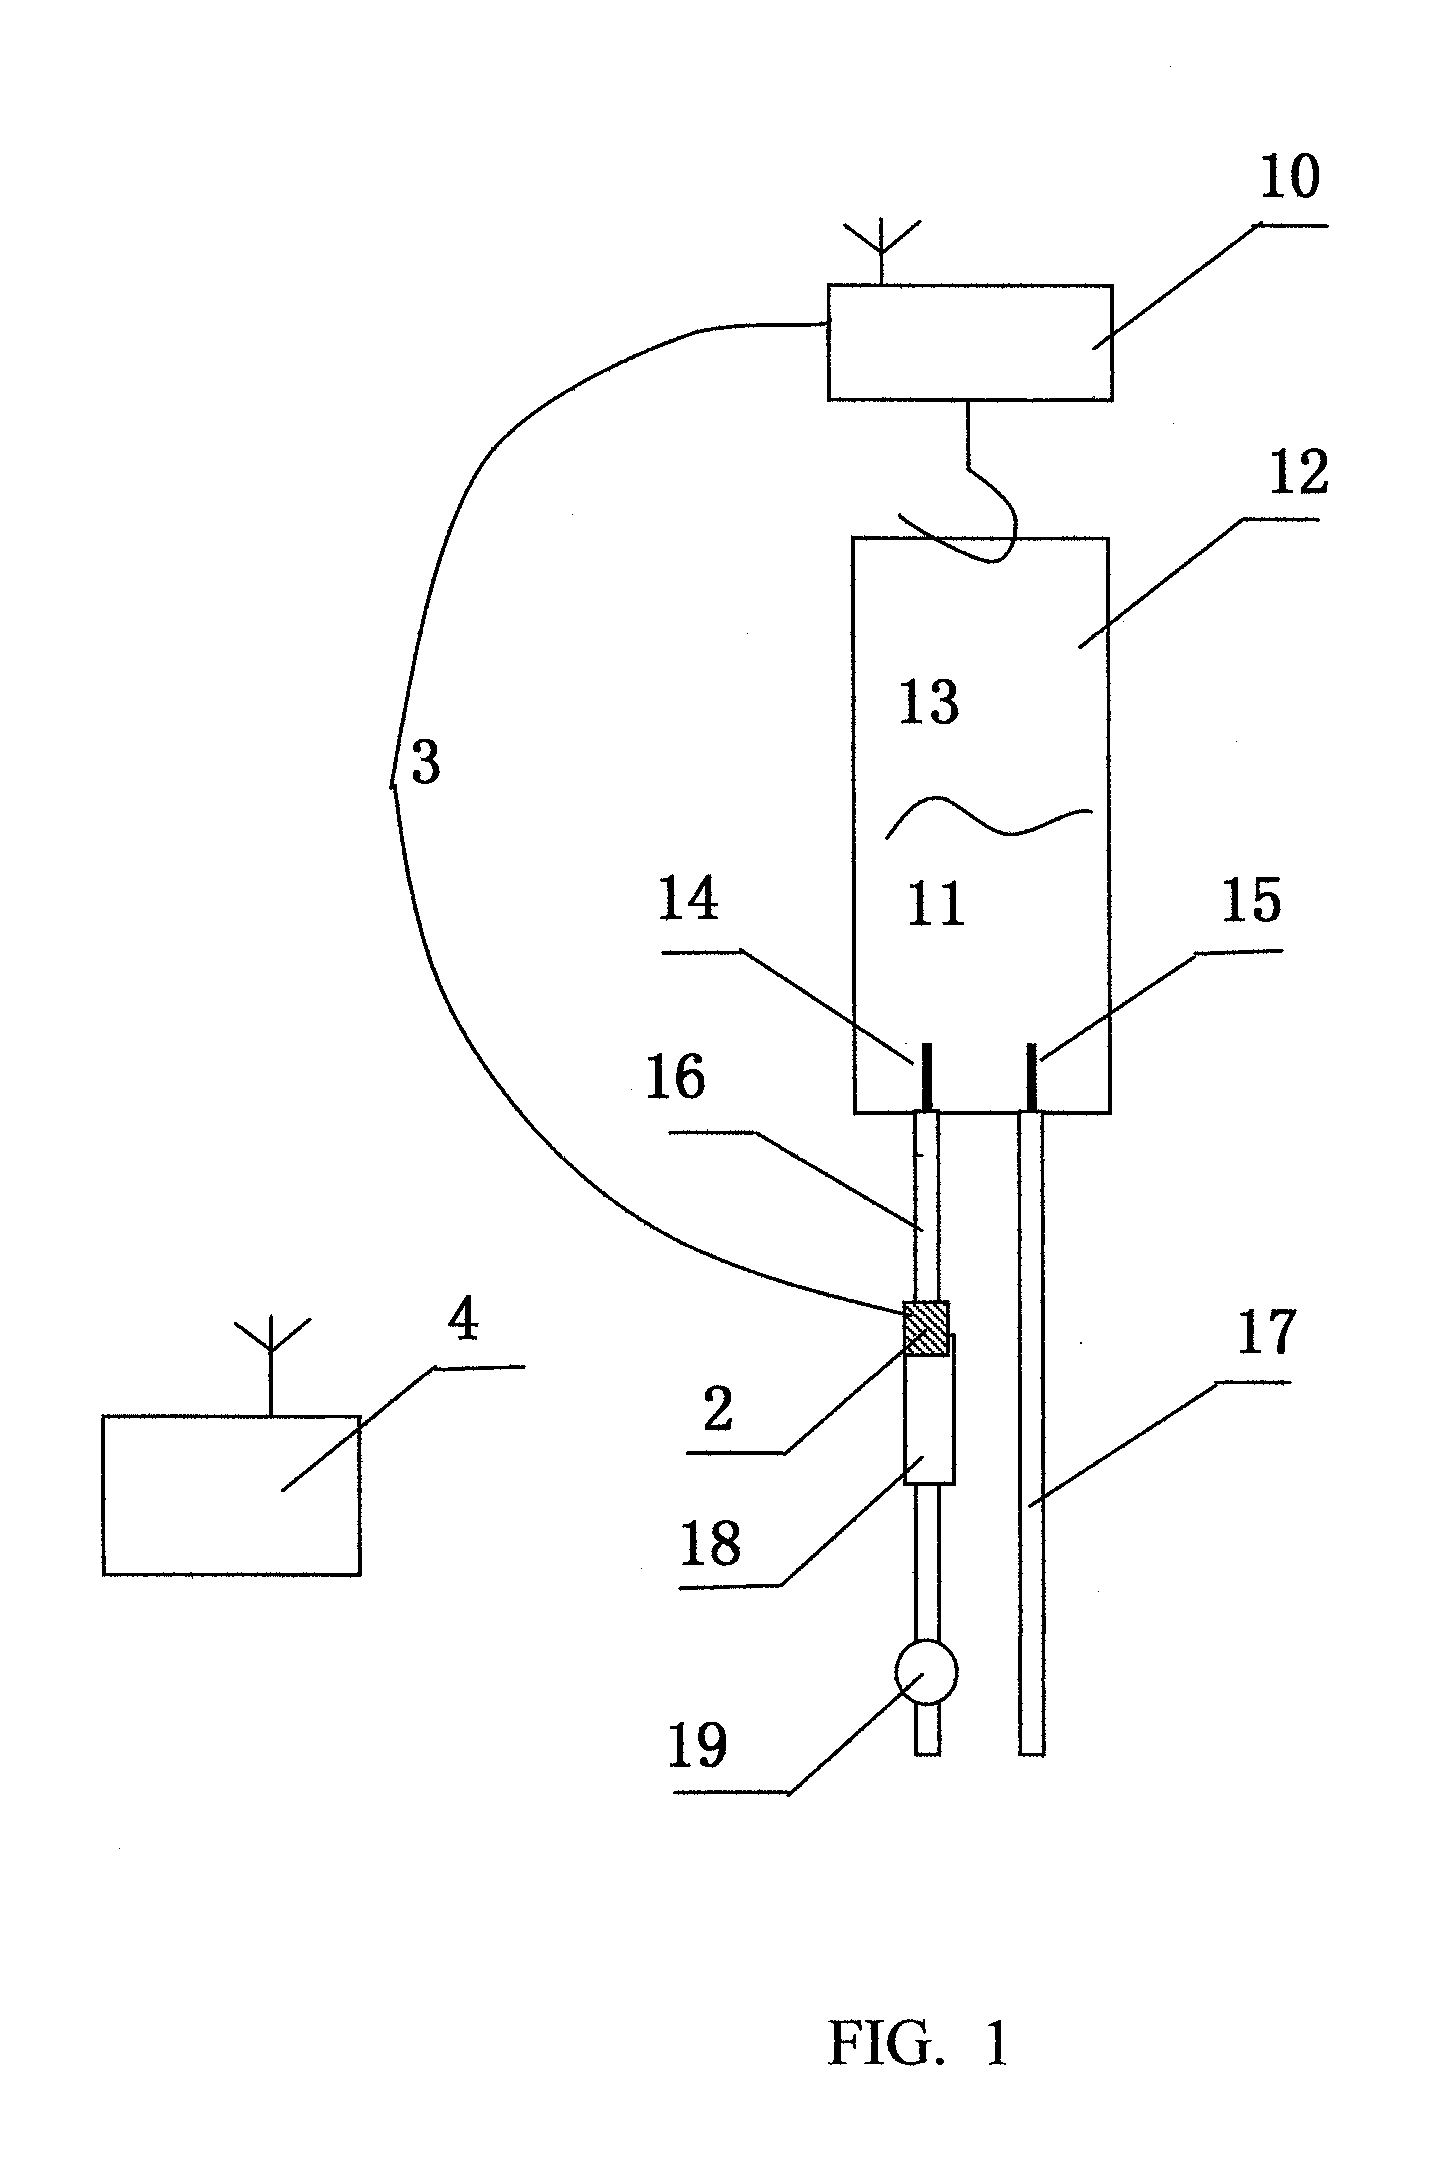 Method for Determining the Empty State of an IV Bottle in an IV Infusion Monitoring Device